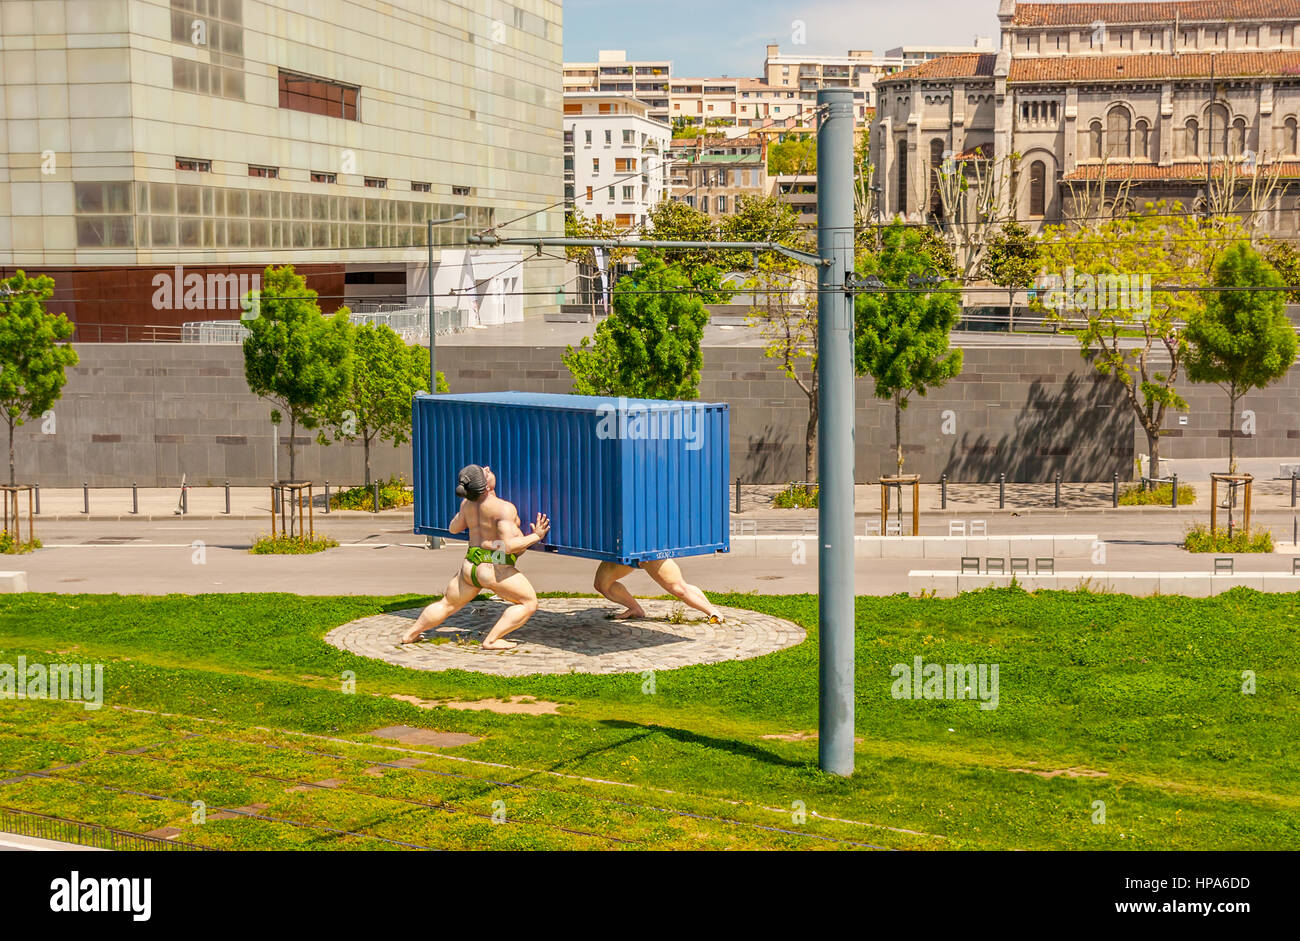 MARSEILLE, FRANCE - MAY 4, 2013: The modern installation of two Sumo wrestlers, holding bright blue shipping container on the lawn of Boulevard de Par Stock Photo